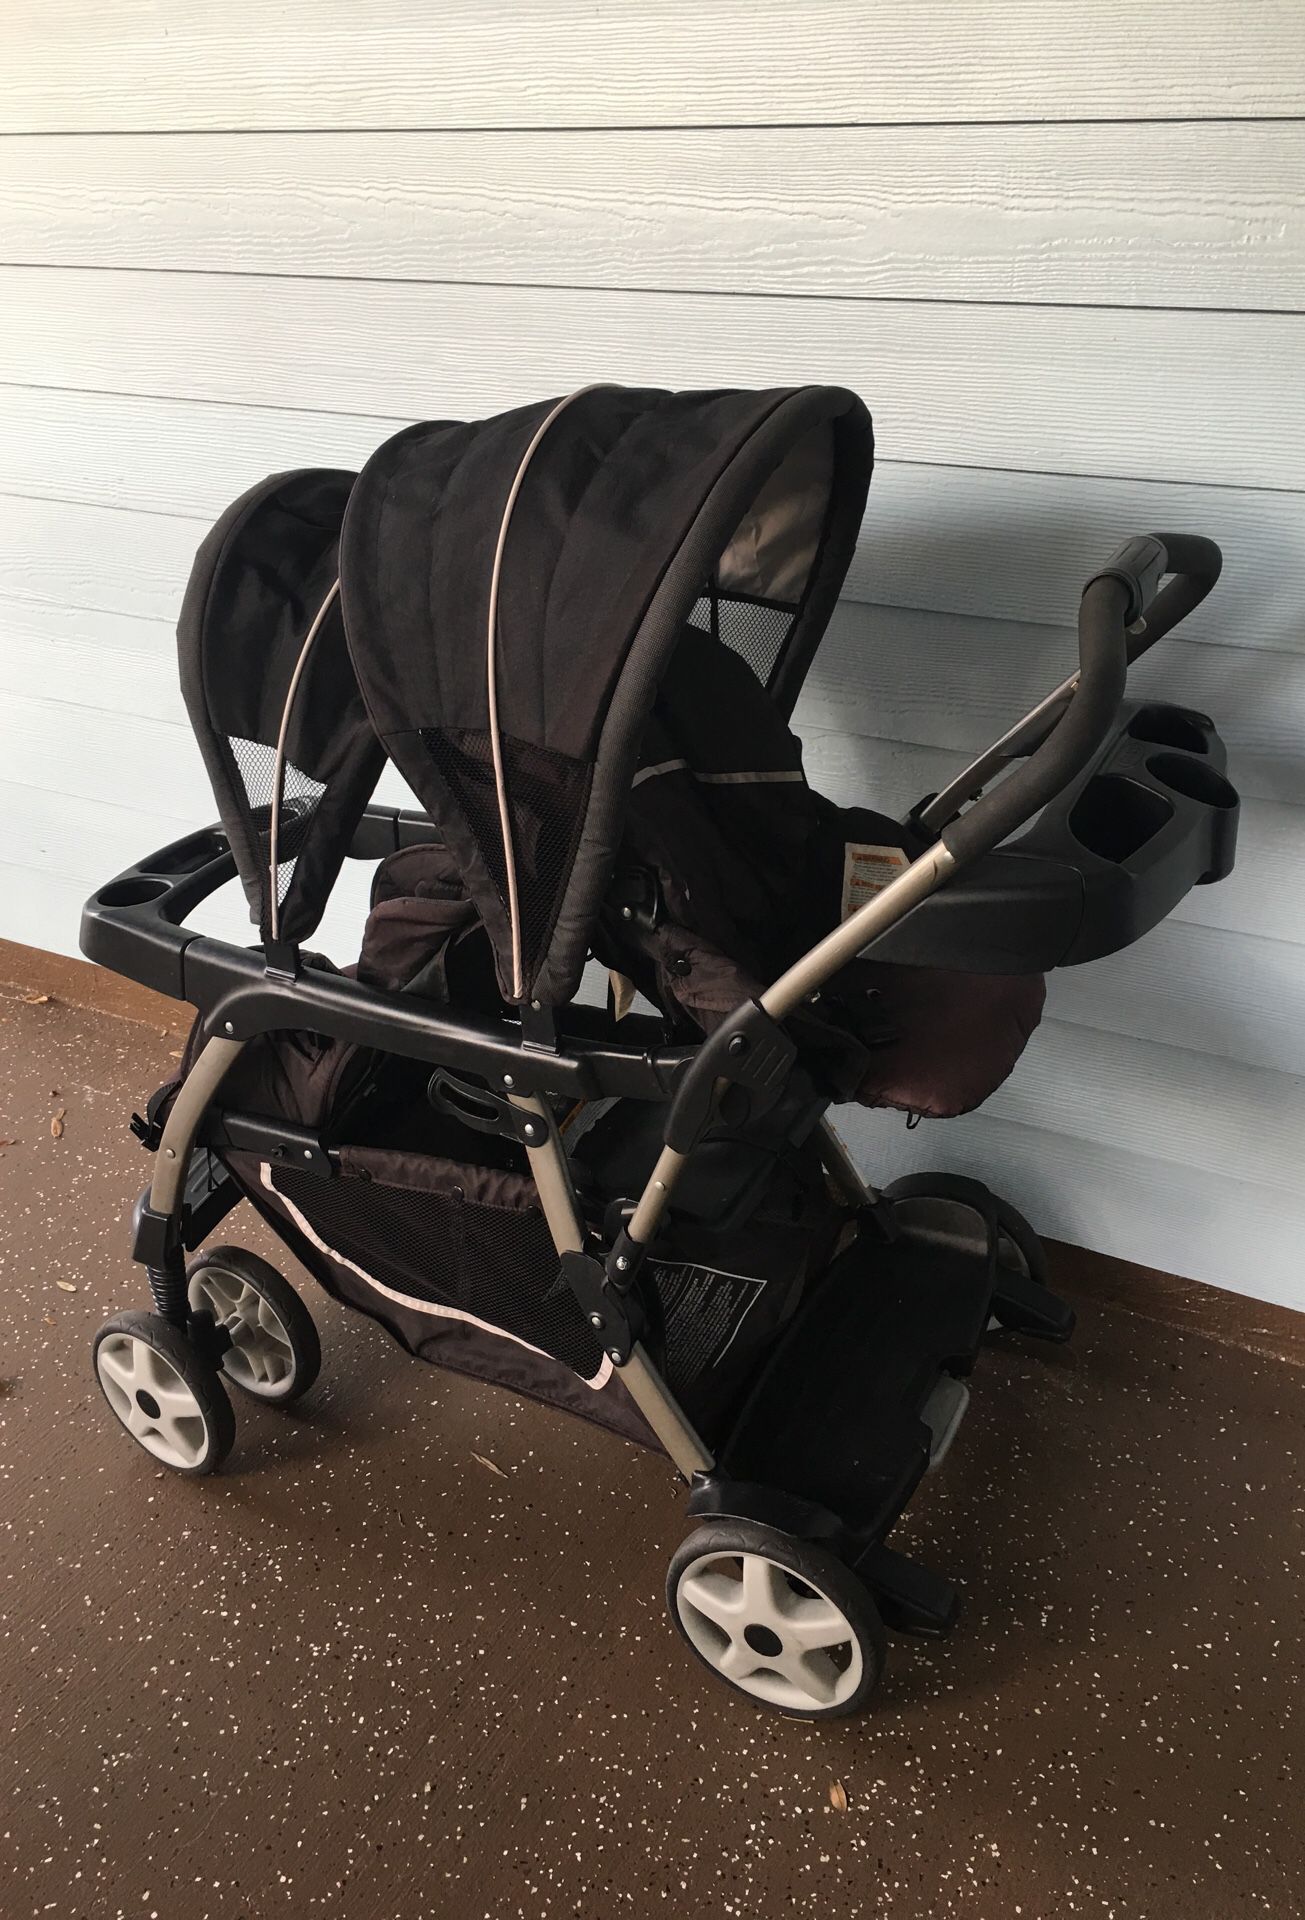 Graco 5 in 1 two seat children and baby stroller